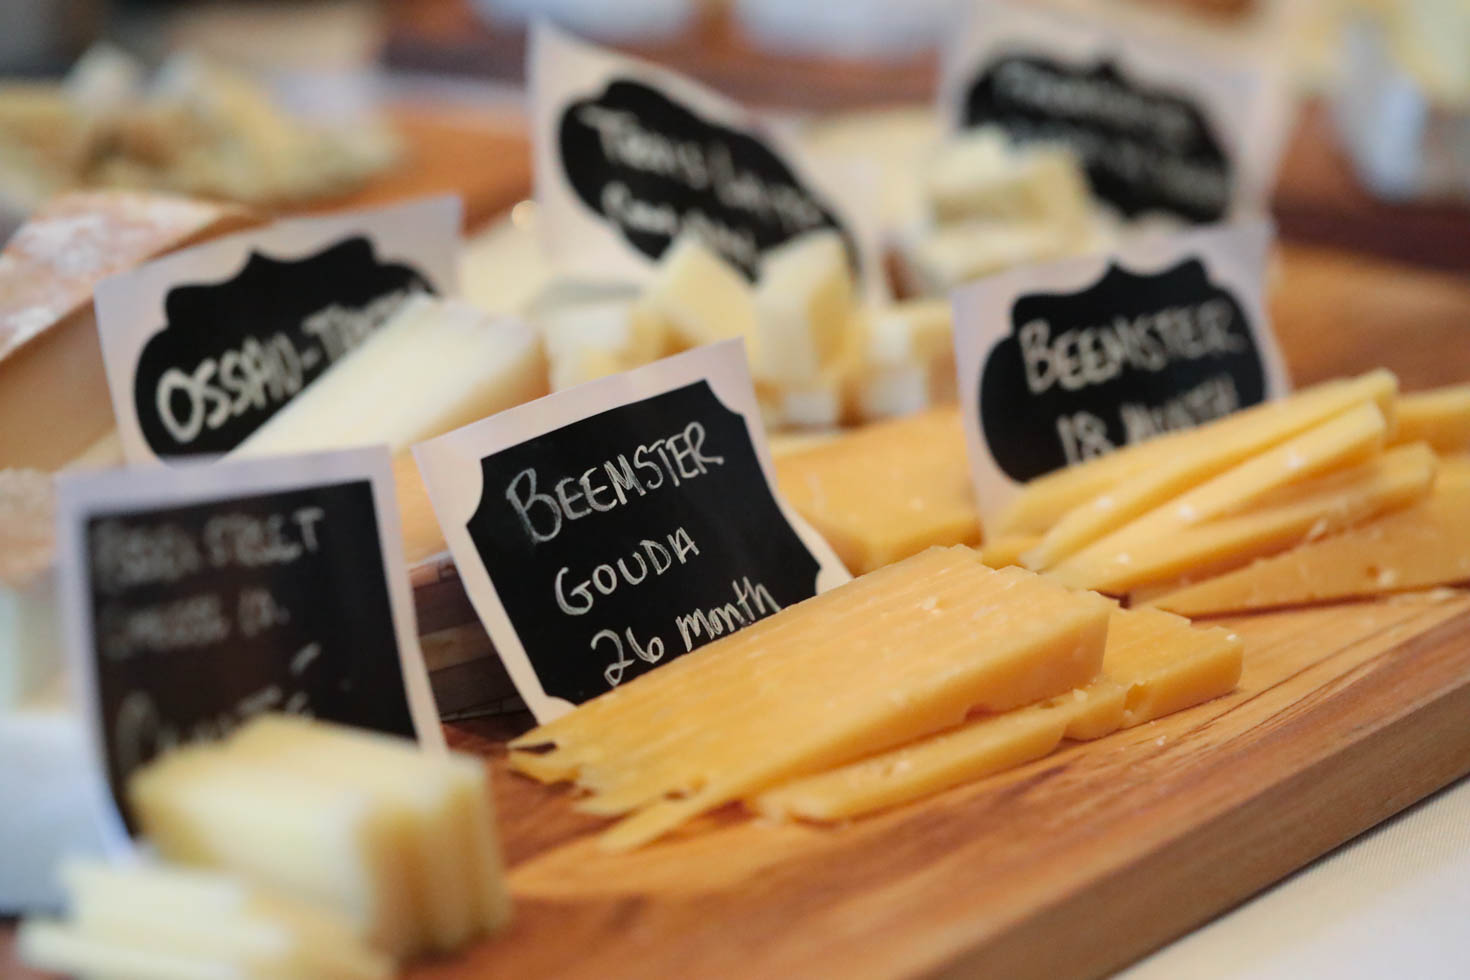 Pieces of Beemster's Gouda (26- and 18-month) cheese cut for tasting - an excellent cheese platter idea. 